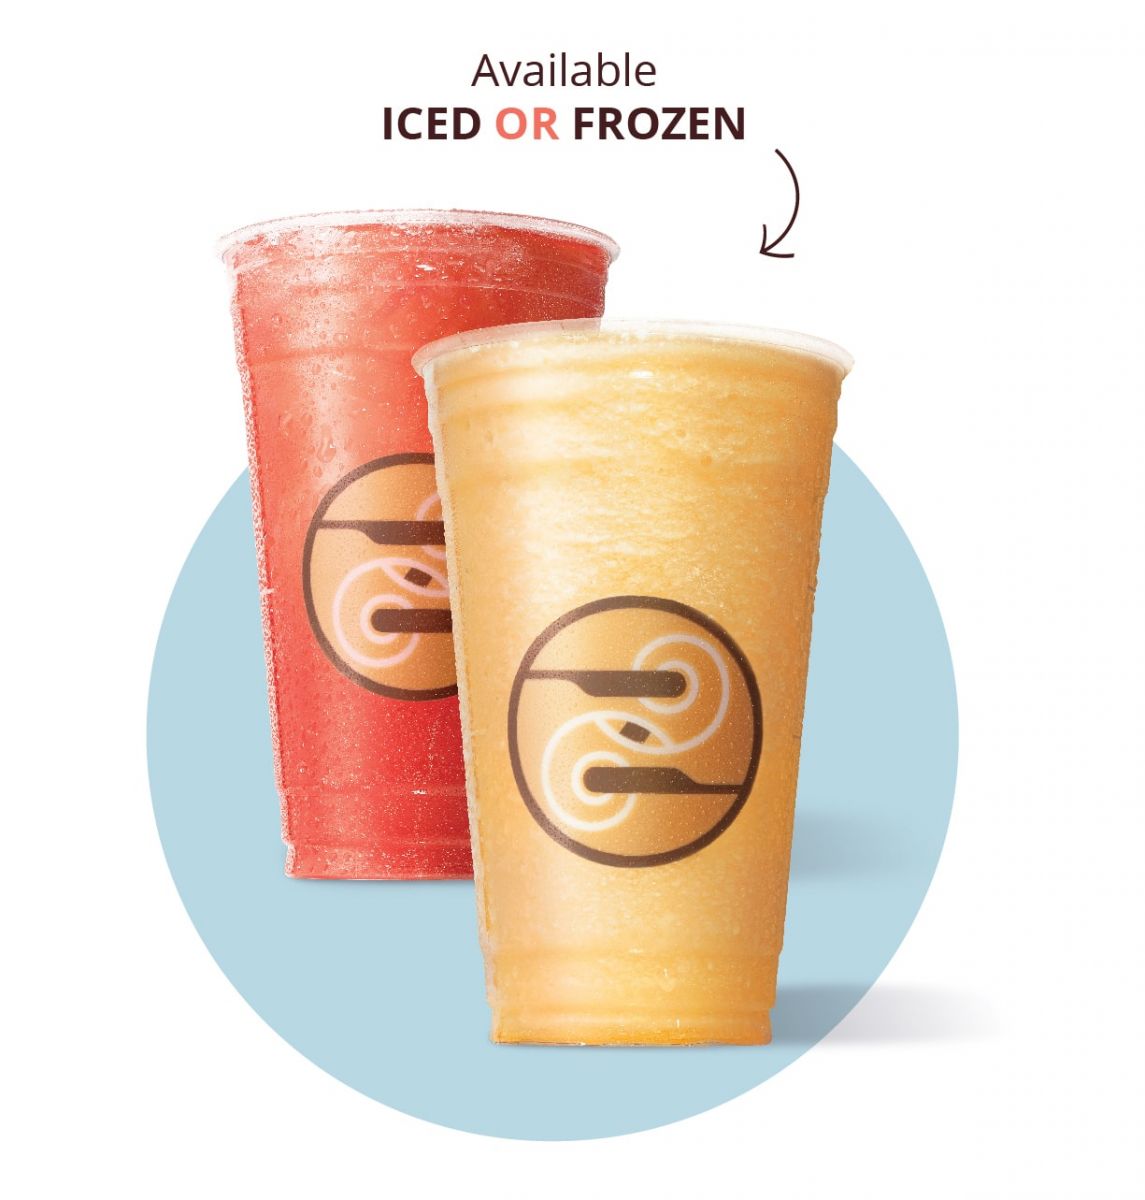 Available iced or frozen - with picture of 2 Ziggi's Energy Infusion drinks in cups